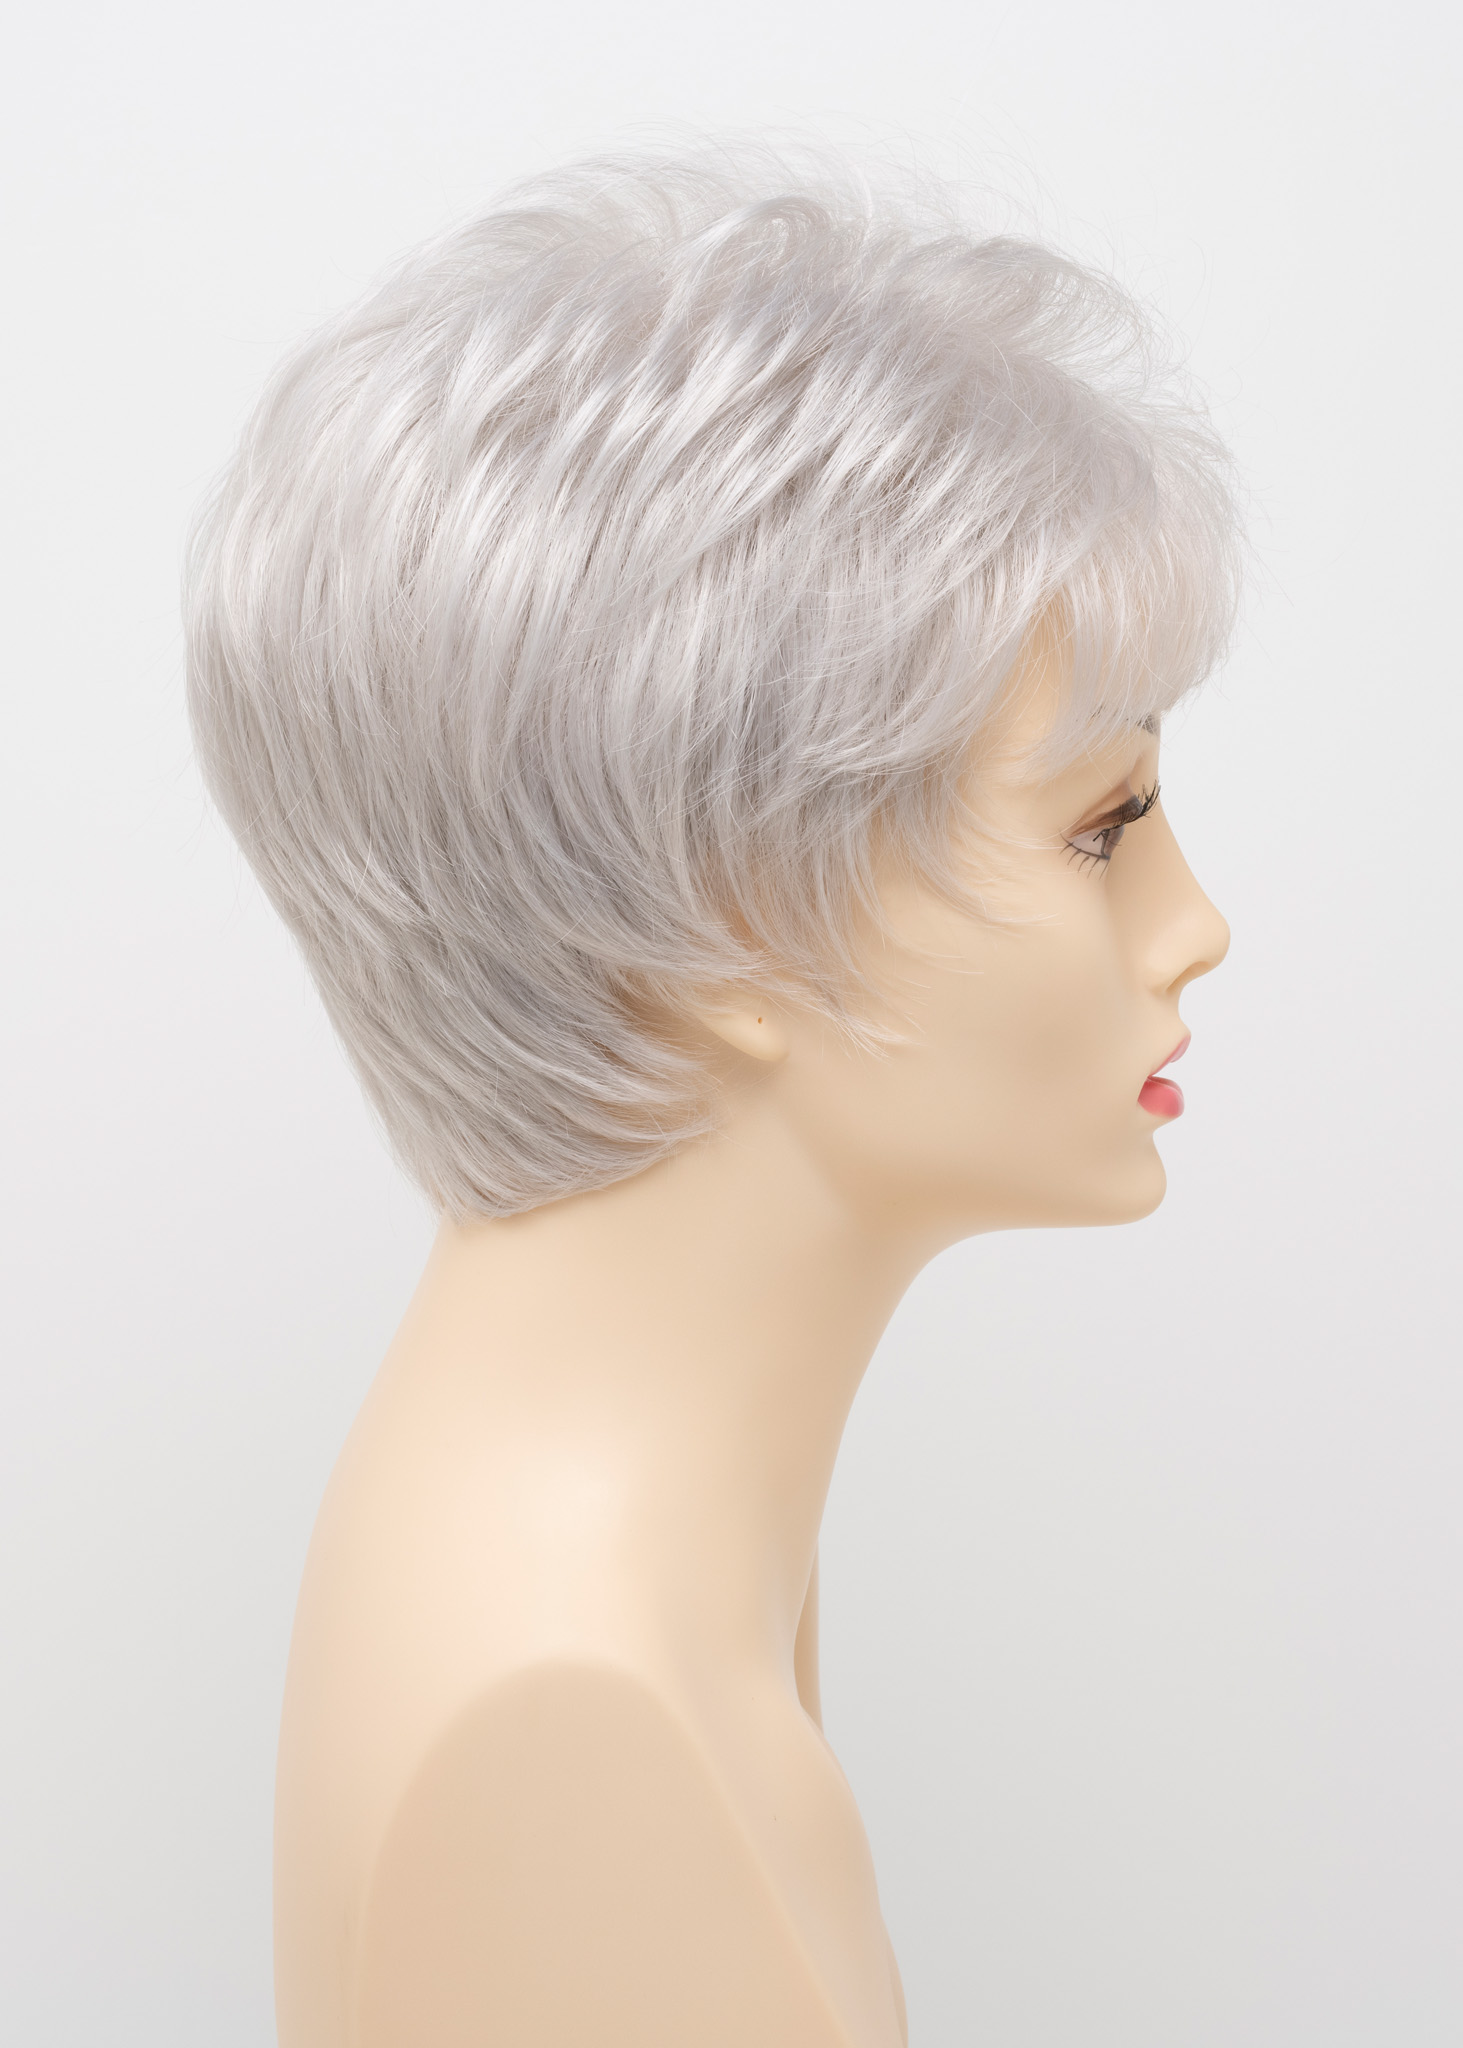 right side view on mannequin head